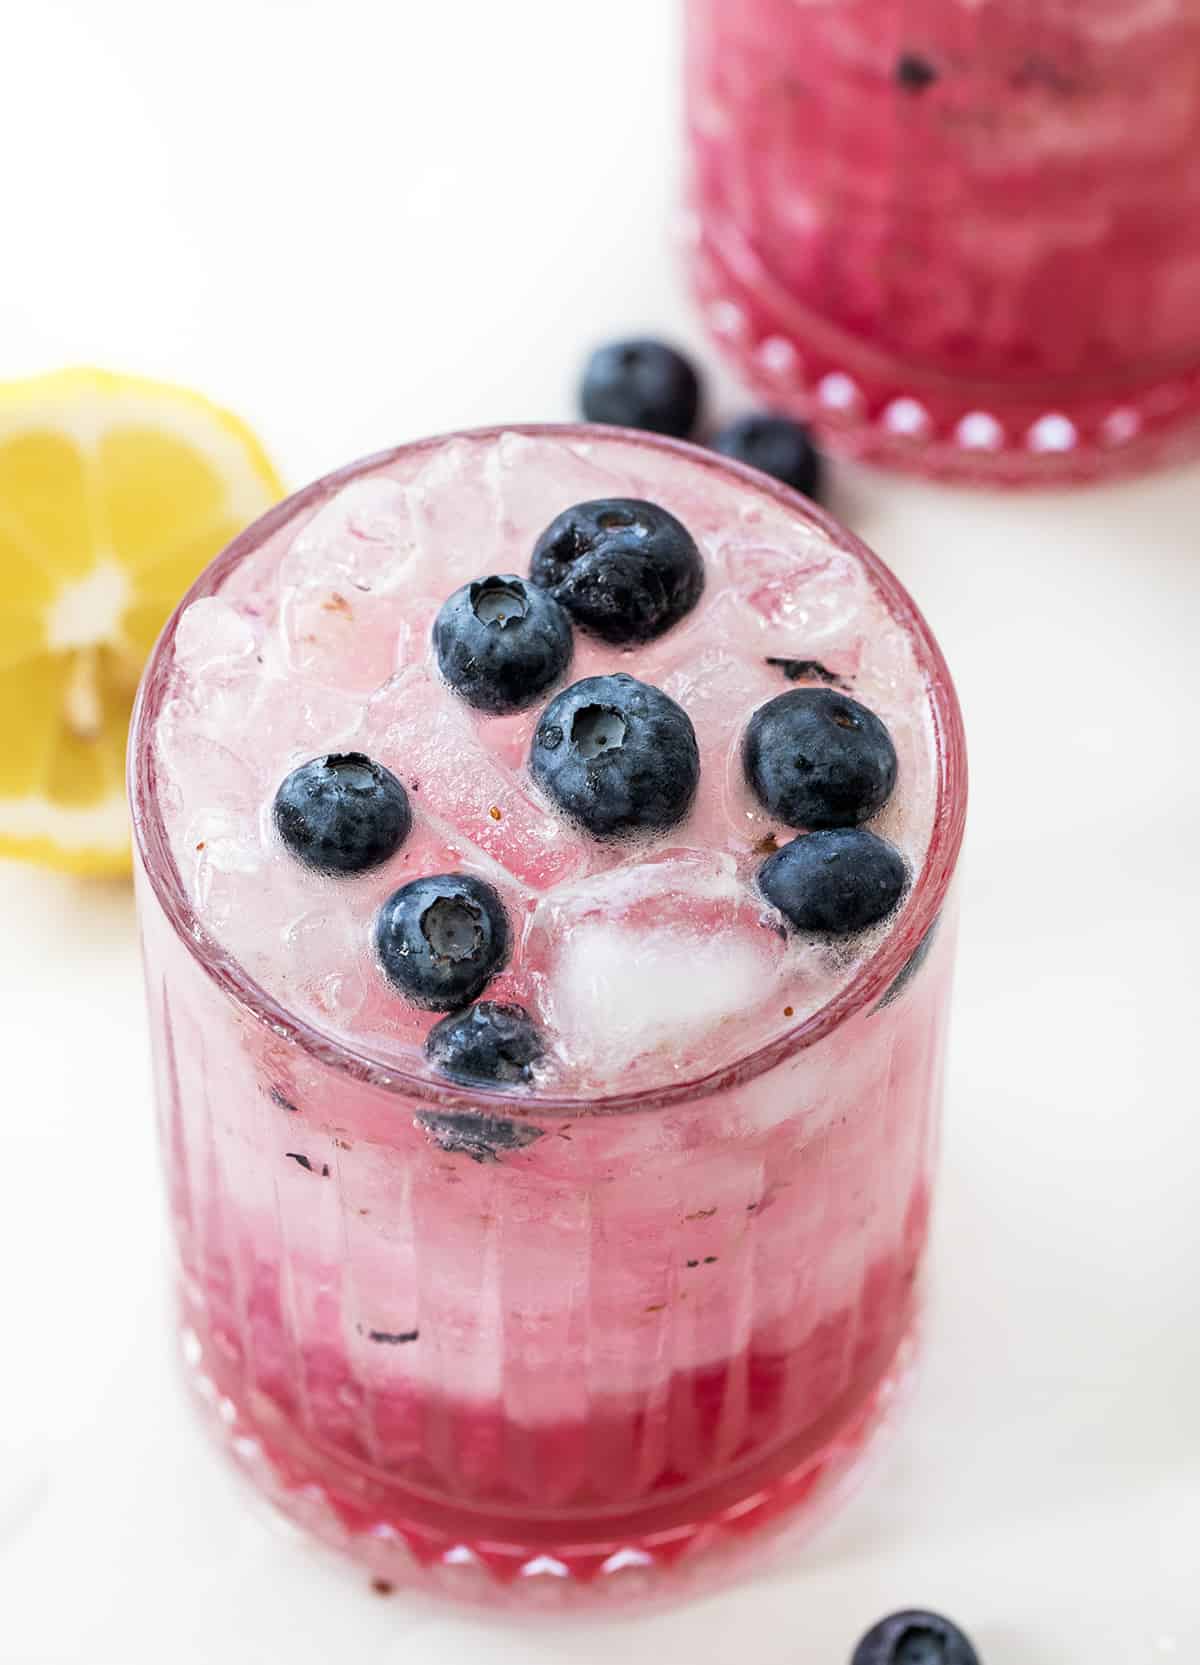 Top of a Glass of Spiked Blueberry Lemonade Surrounded by Another Glass, Lemons, and Fresh Blueberries on a White Counter.